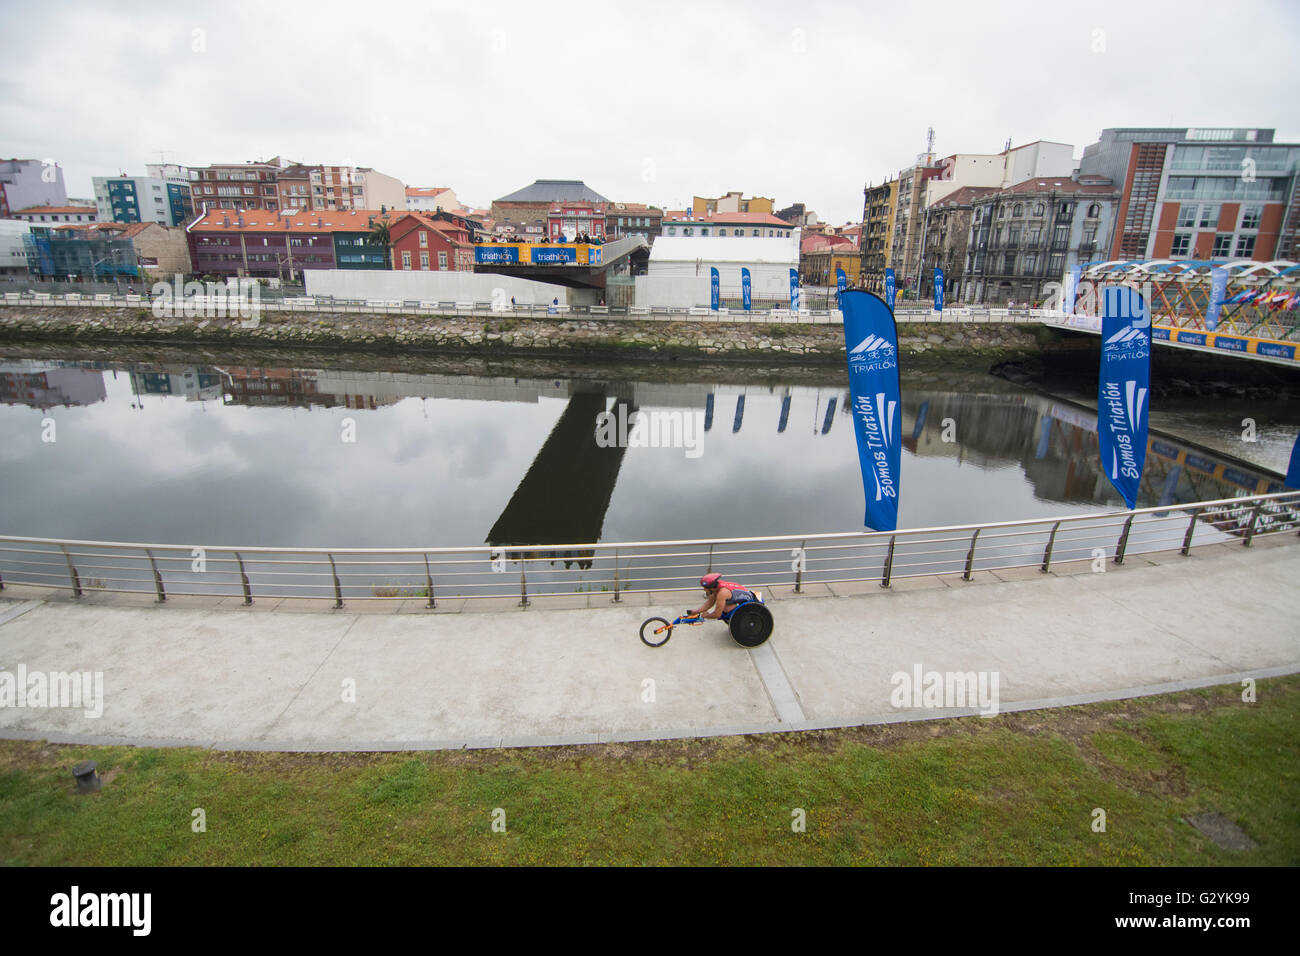 Aviles, Spain. 4th June, 2016. An athlete runs during the paradhuatlon category of 2016 Aviles ITU Duathlon World Championships at Center Niemeyer on June 4, 2016 in Aviles, Spain. Credit: David Gato/Alamy Live News Stock Photo